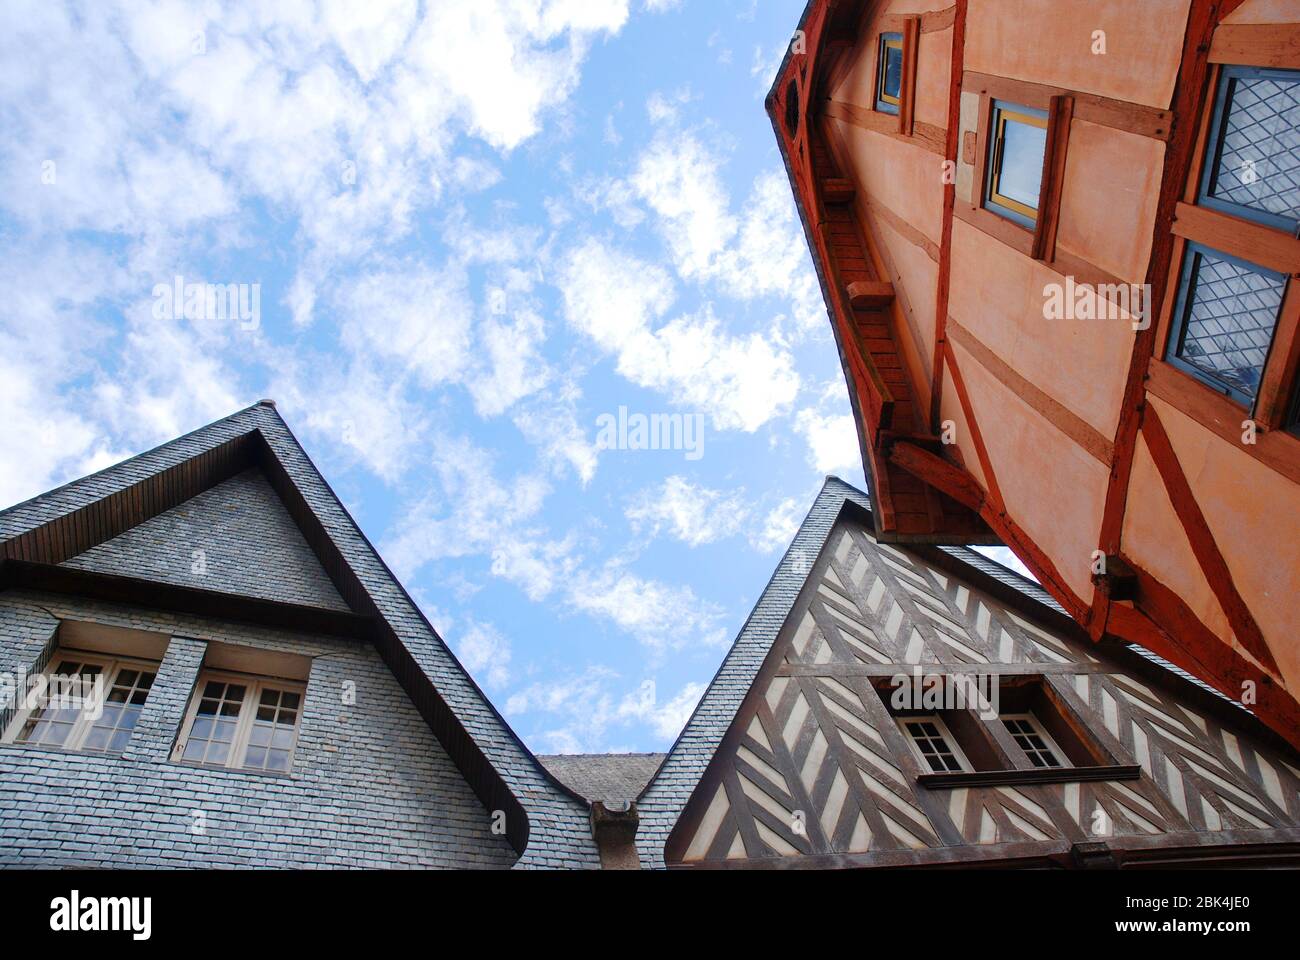 ensemble of different architecture styles in Vitre, France Stock Photo